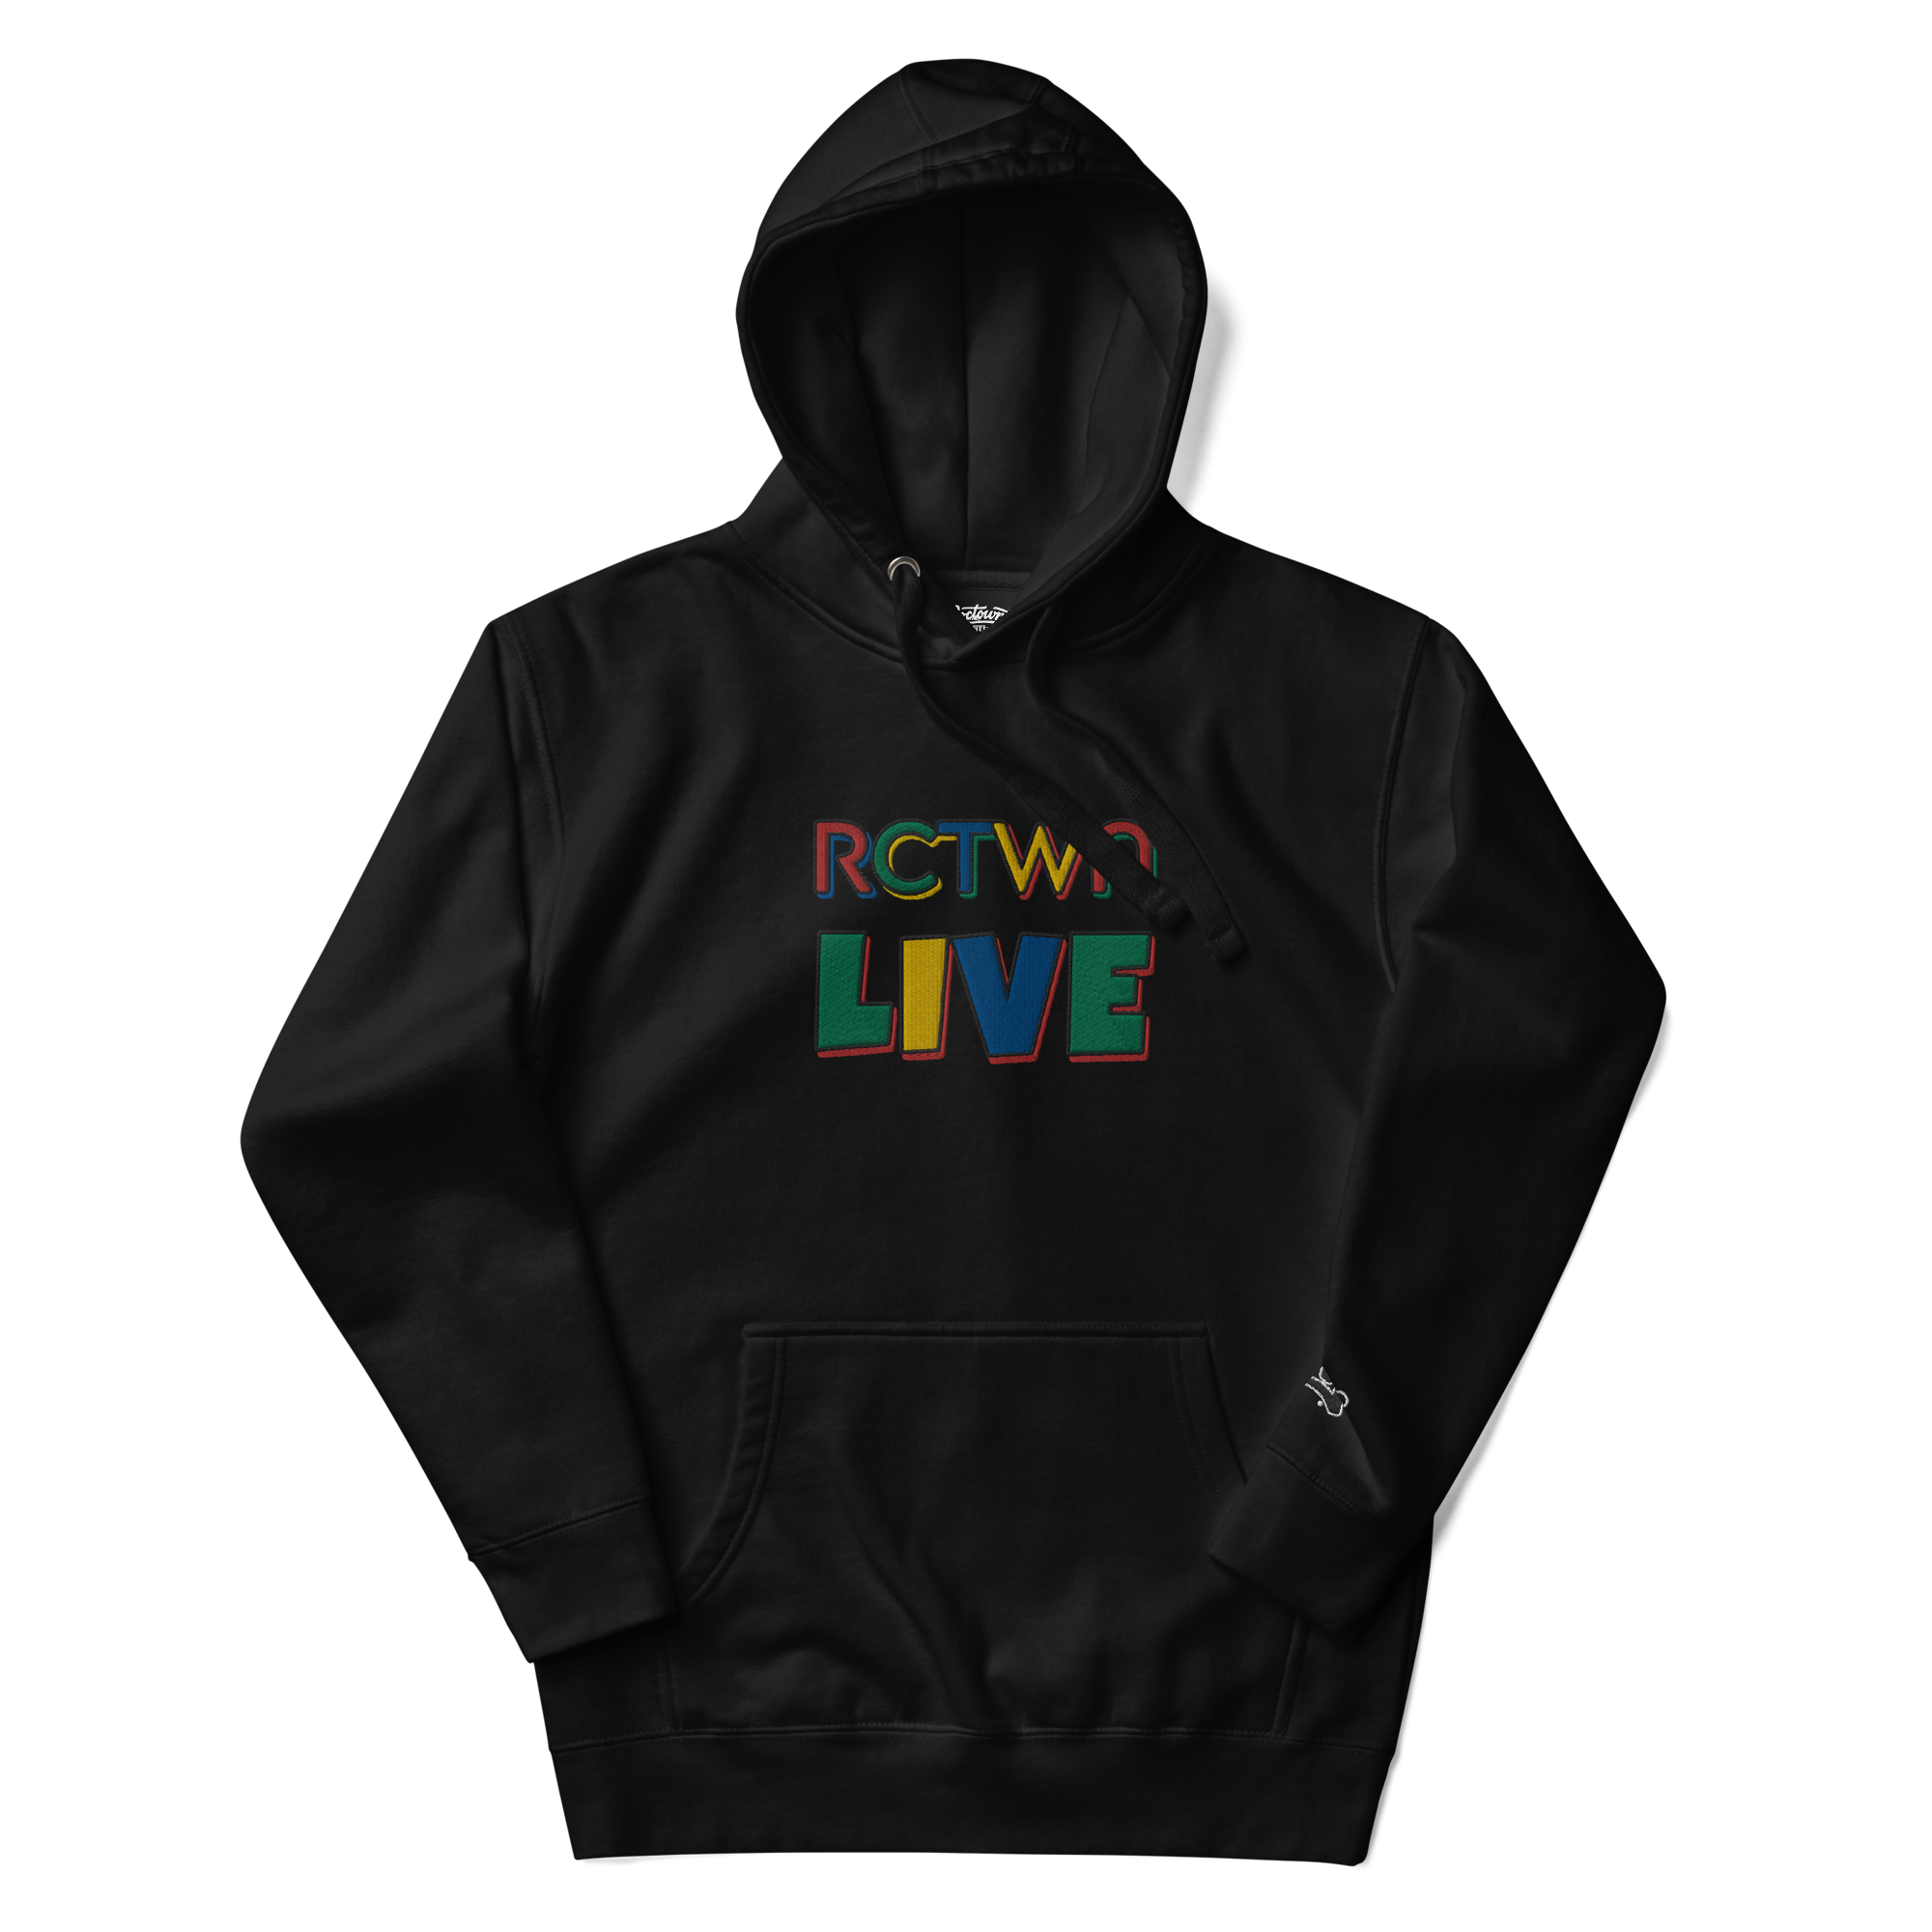 unisex-premium-hoodie-black-front-657231fbe02a8.png